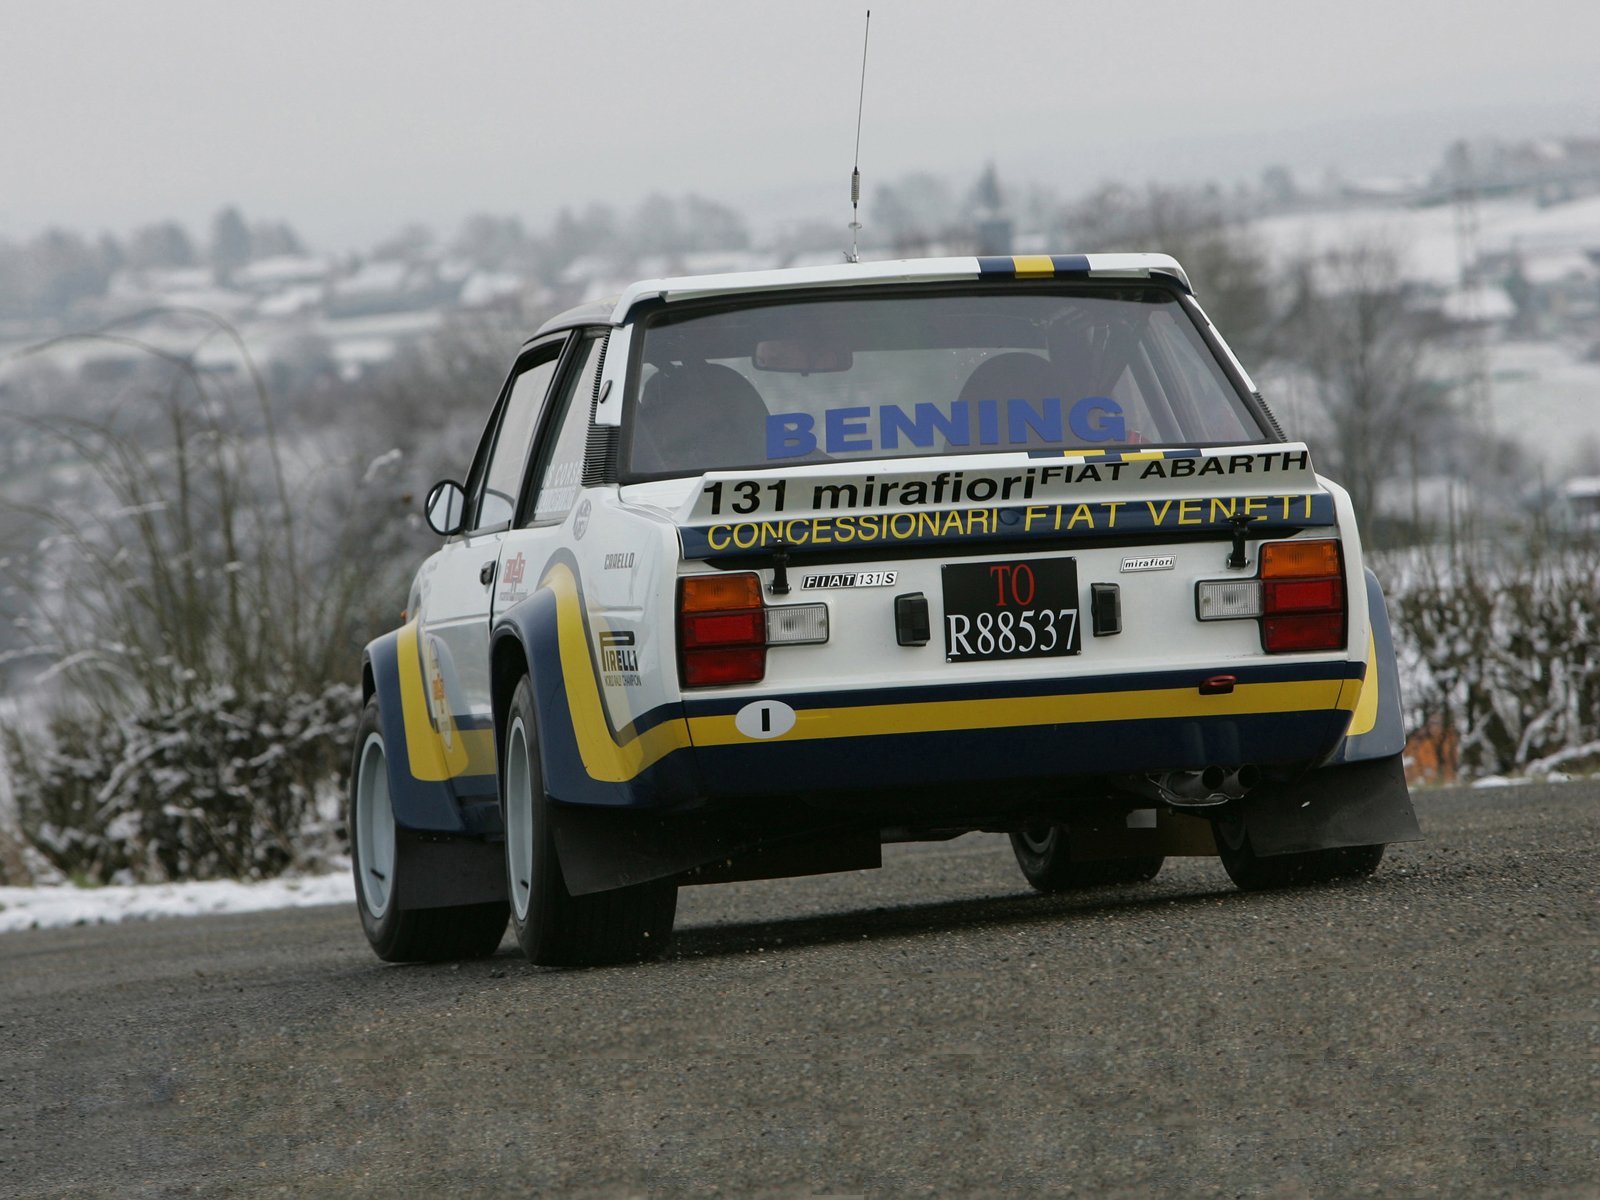 Fiat 131 Wallpapers